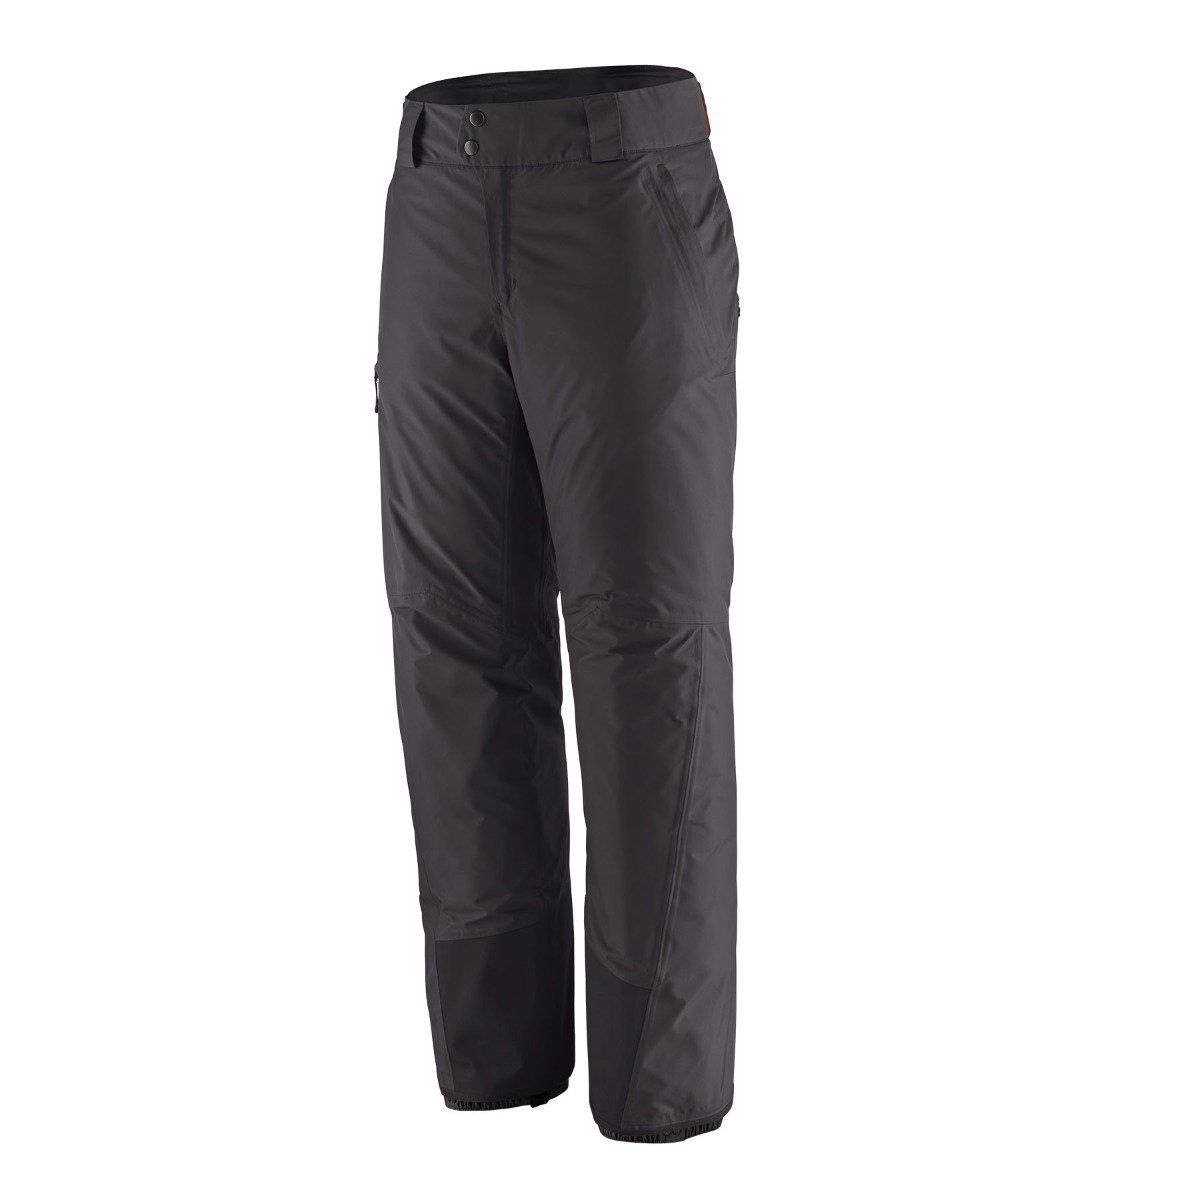 Patagonia - M's Insulated Powder Town Pants